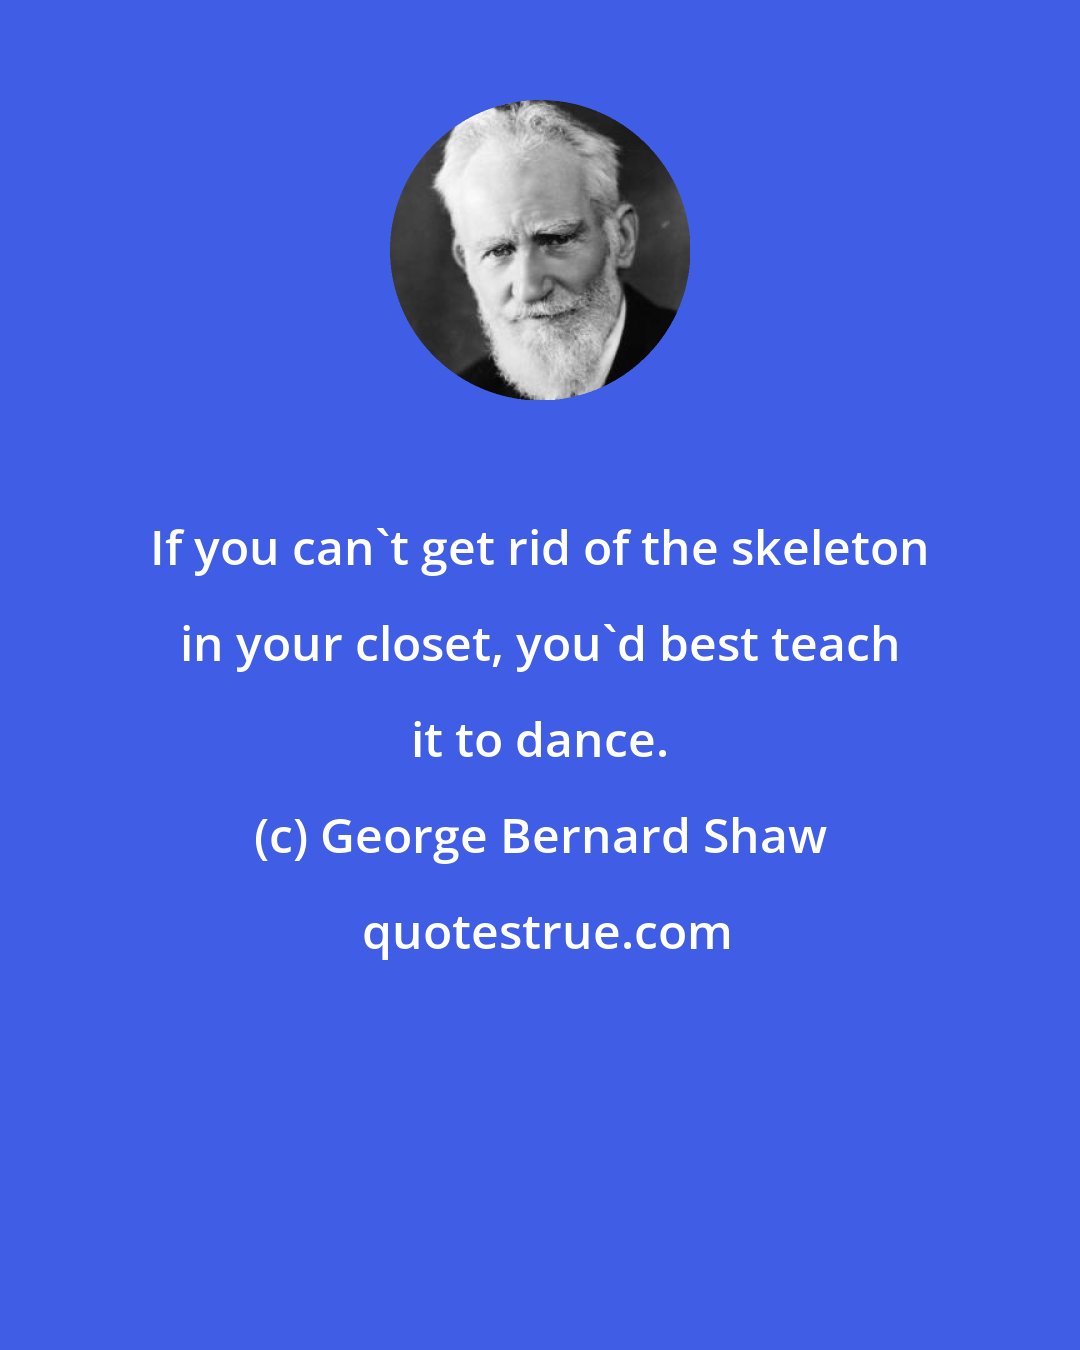 George Bernard Shaw: If you can't get rid of the skeleton in your closet, you'd best teach it to dance.